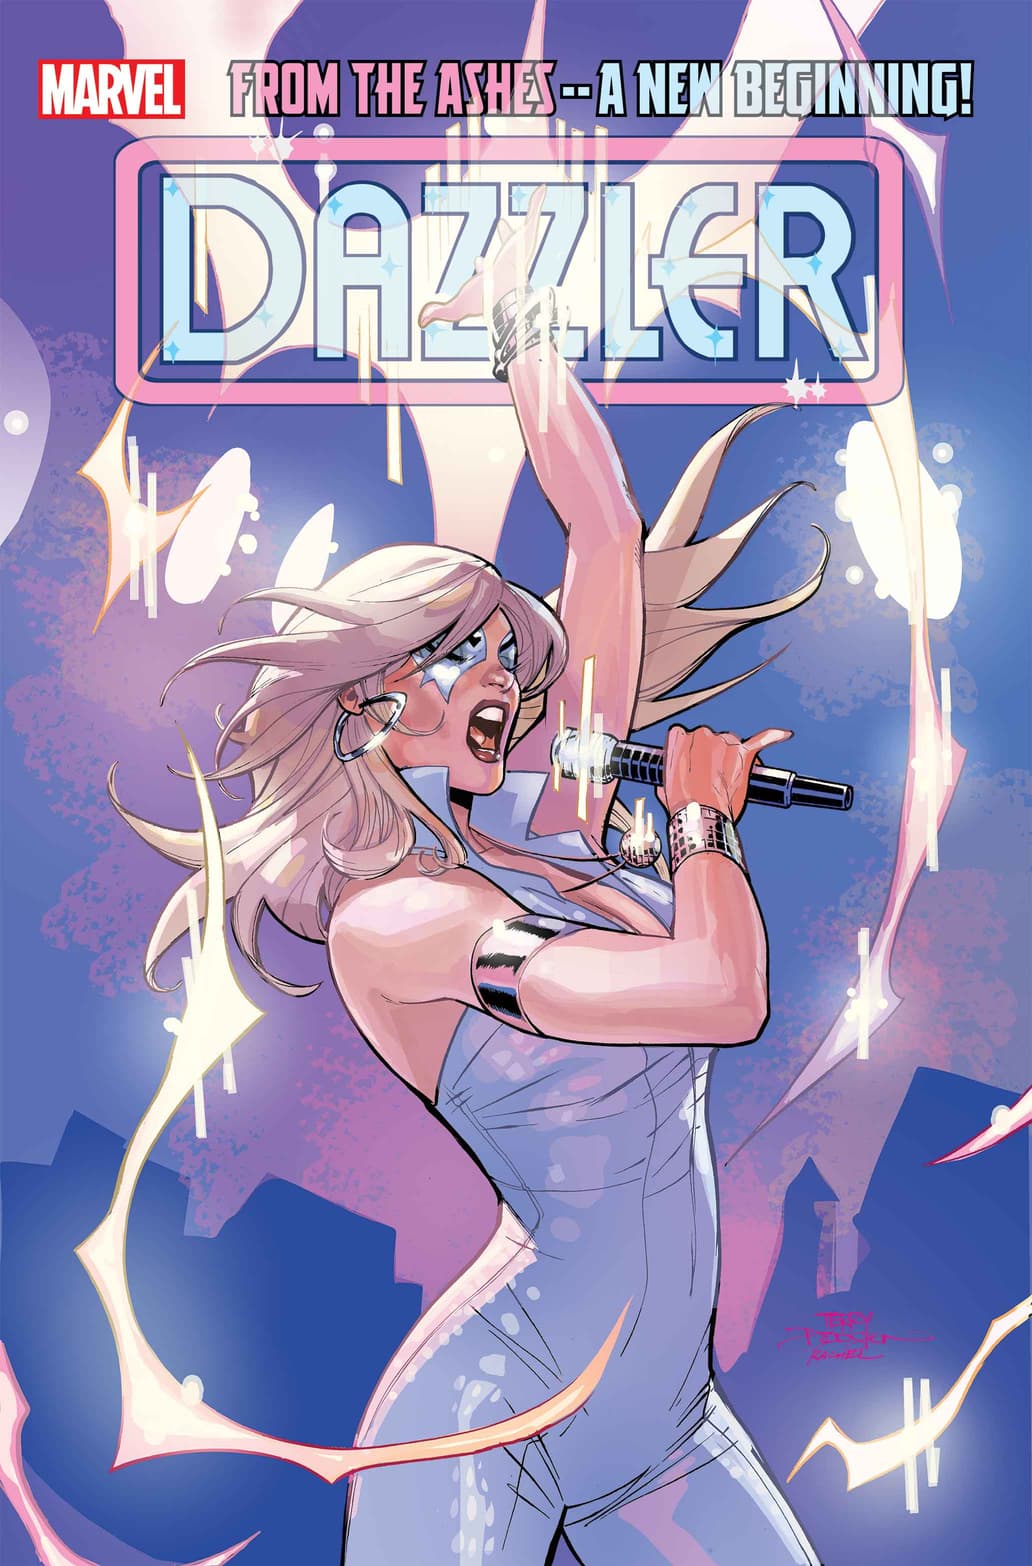 DAZZLER #1 cover by Terry Dodson and Rachel Dodson